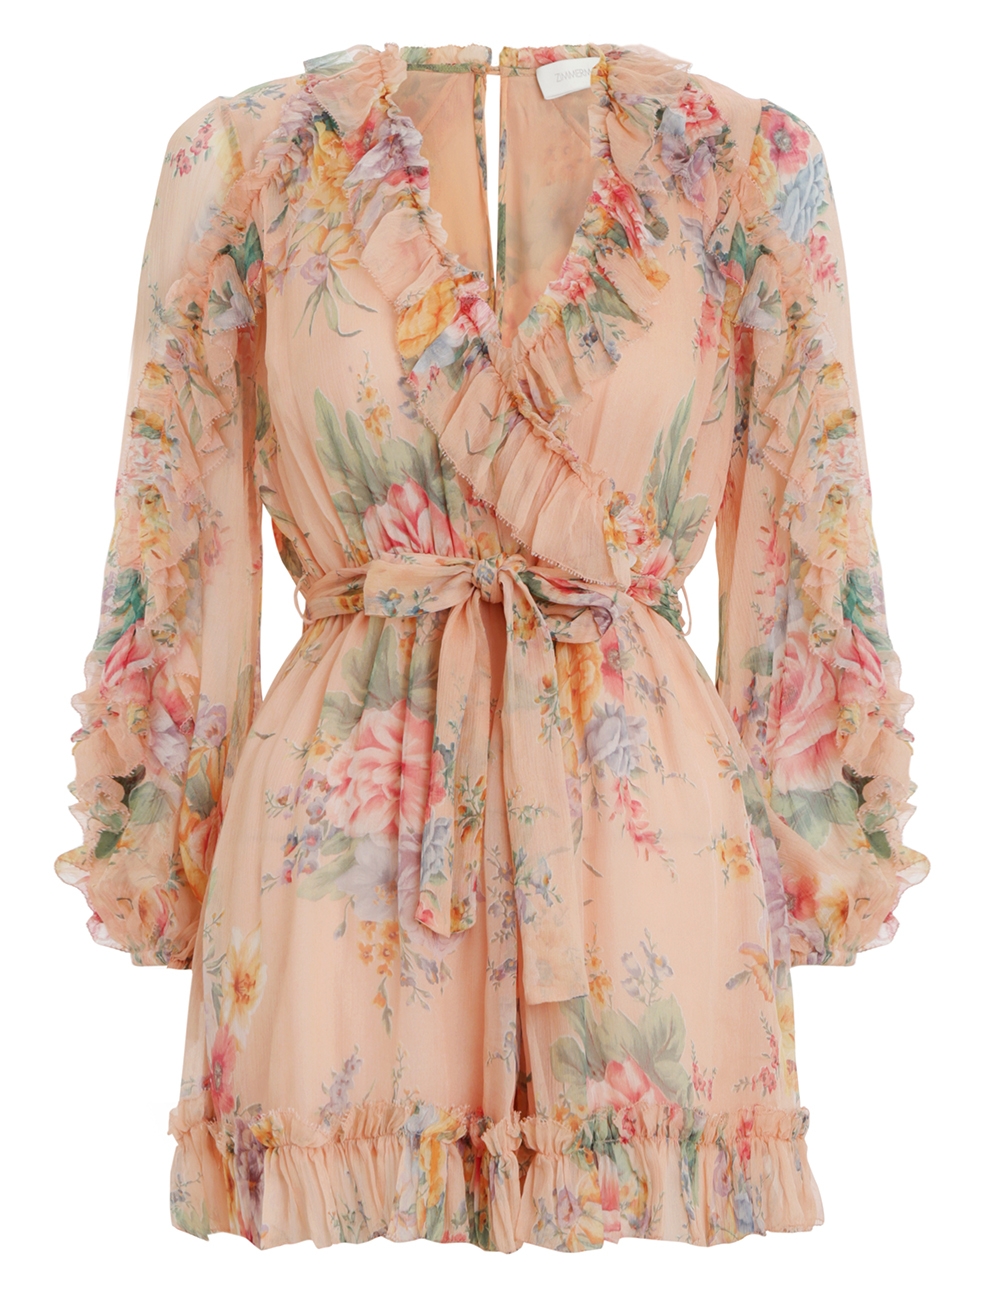 Zimmermann Plunge Ruffle Coral Floral Playsuit - Dresses 4 Hire